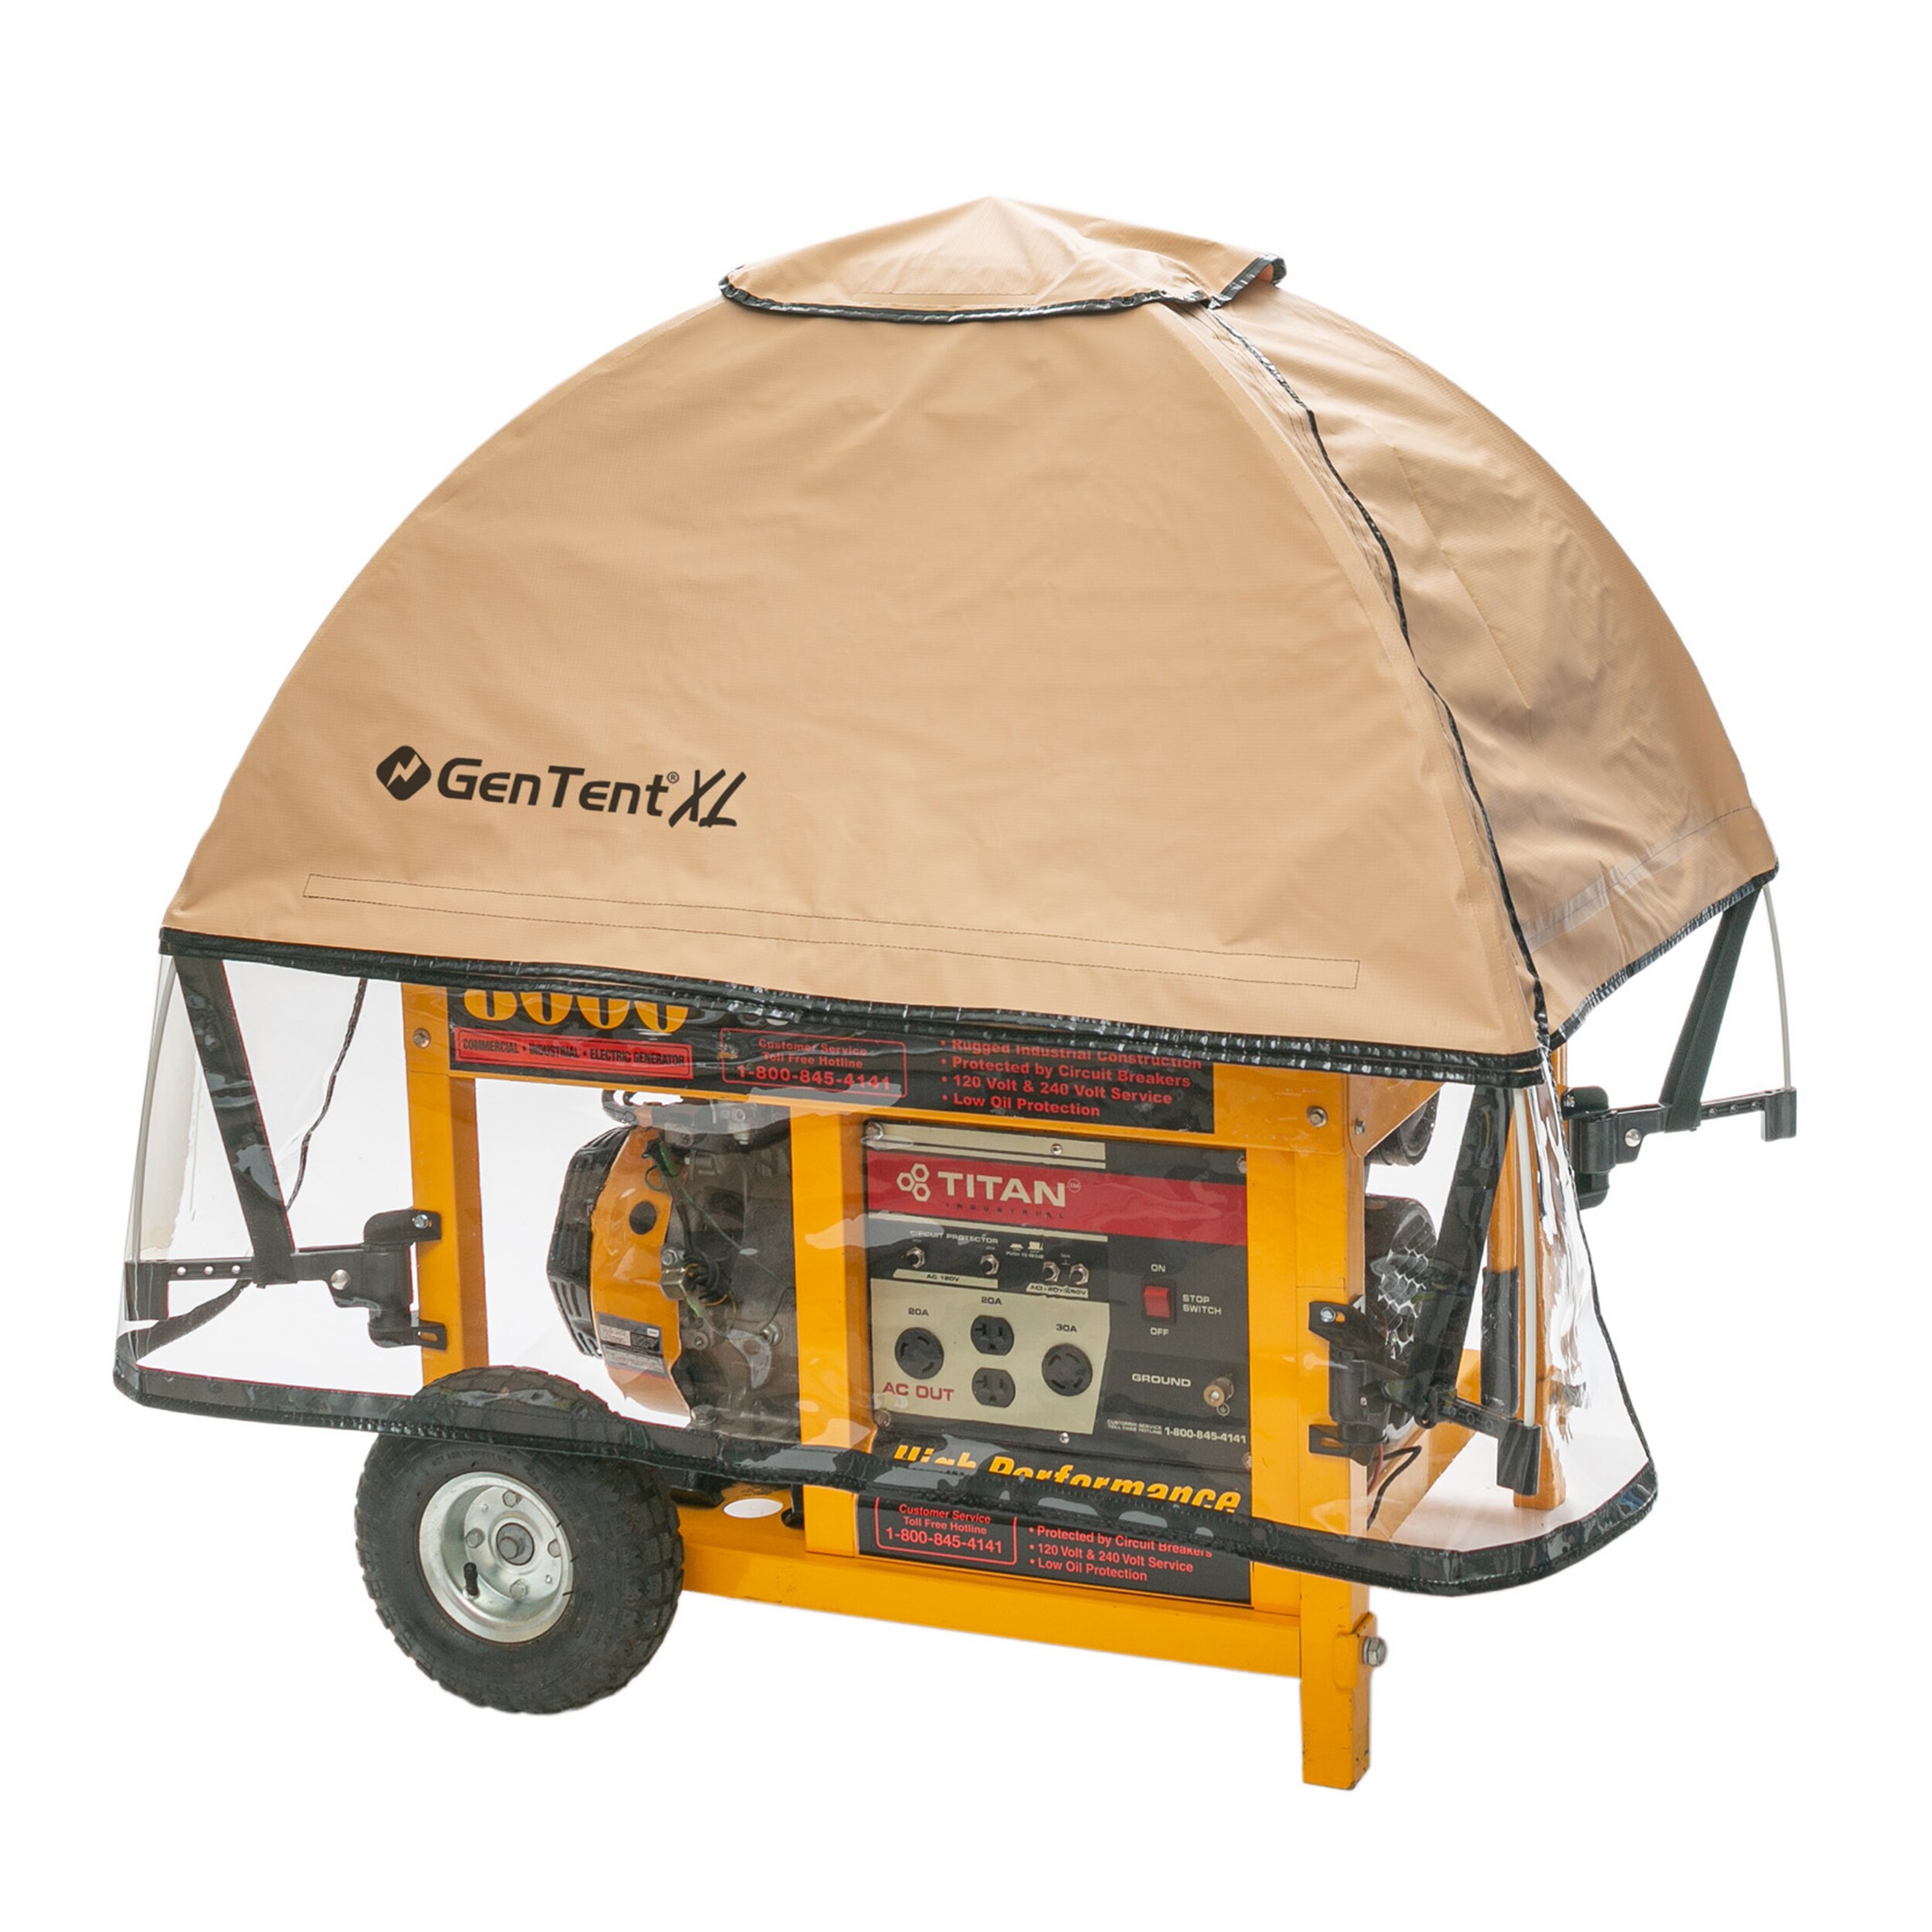 Universal Kit TanLight GenTent 20k Generator Tent Running Cover Extreme - Compatible with 10000w+ Portable Generators 